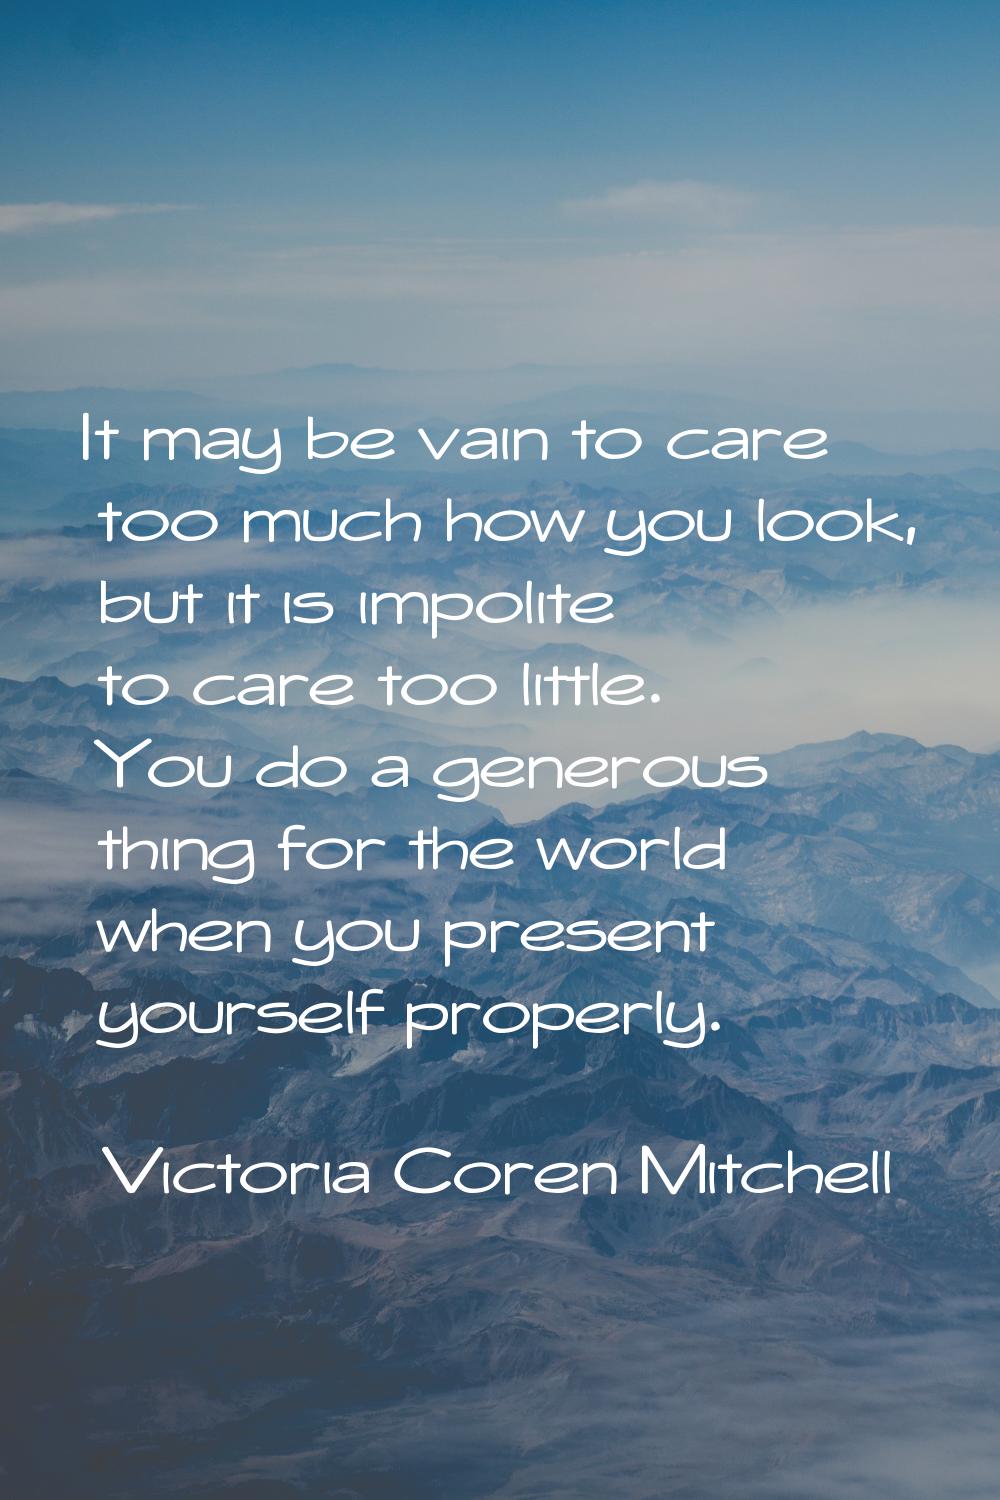 It may be vain to care too much how you look, but it is impolite to care too little. You do a gener